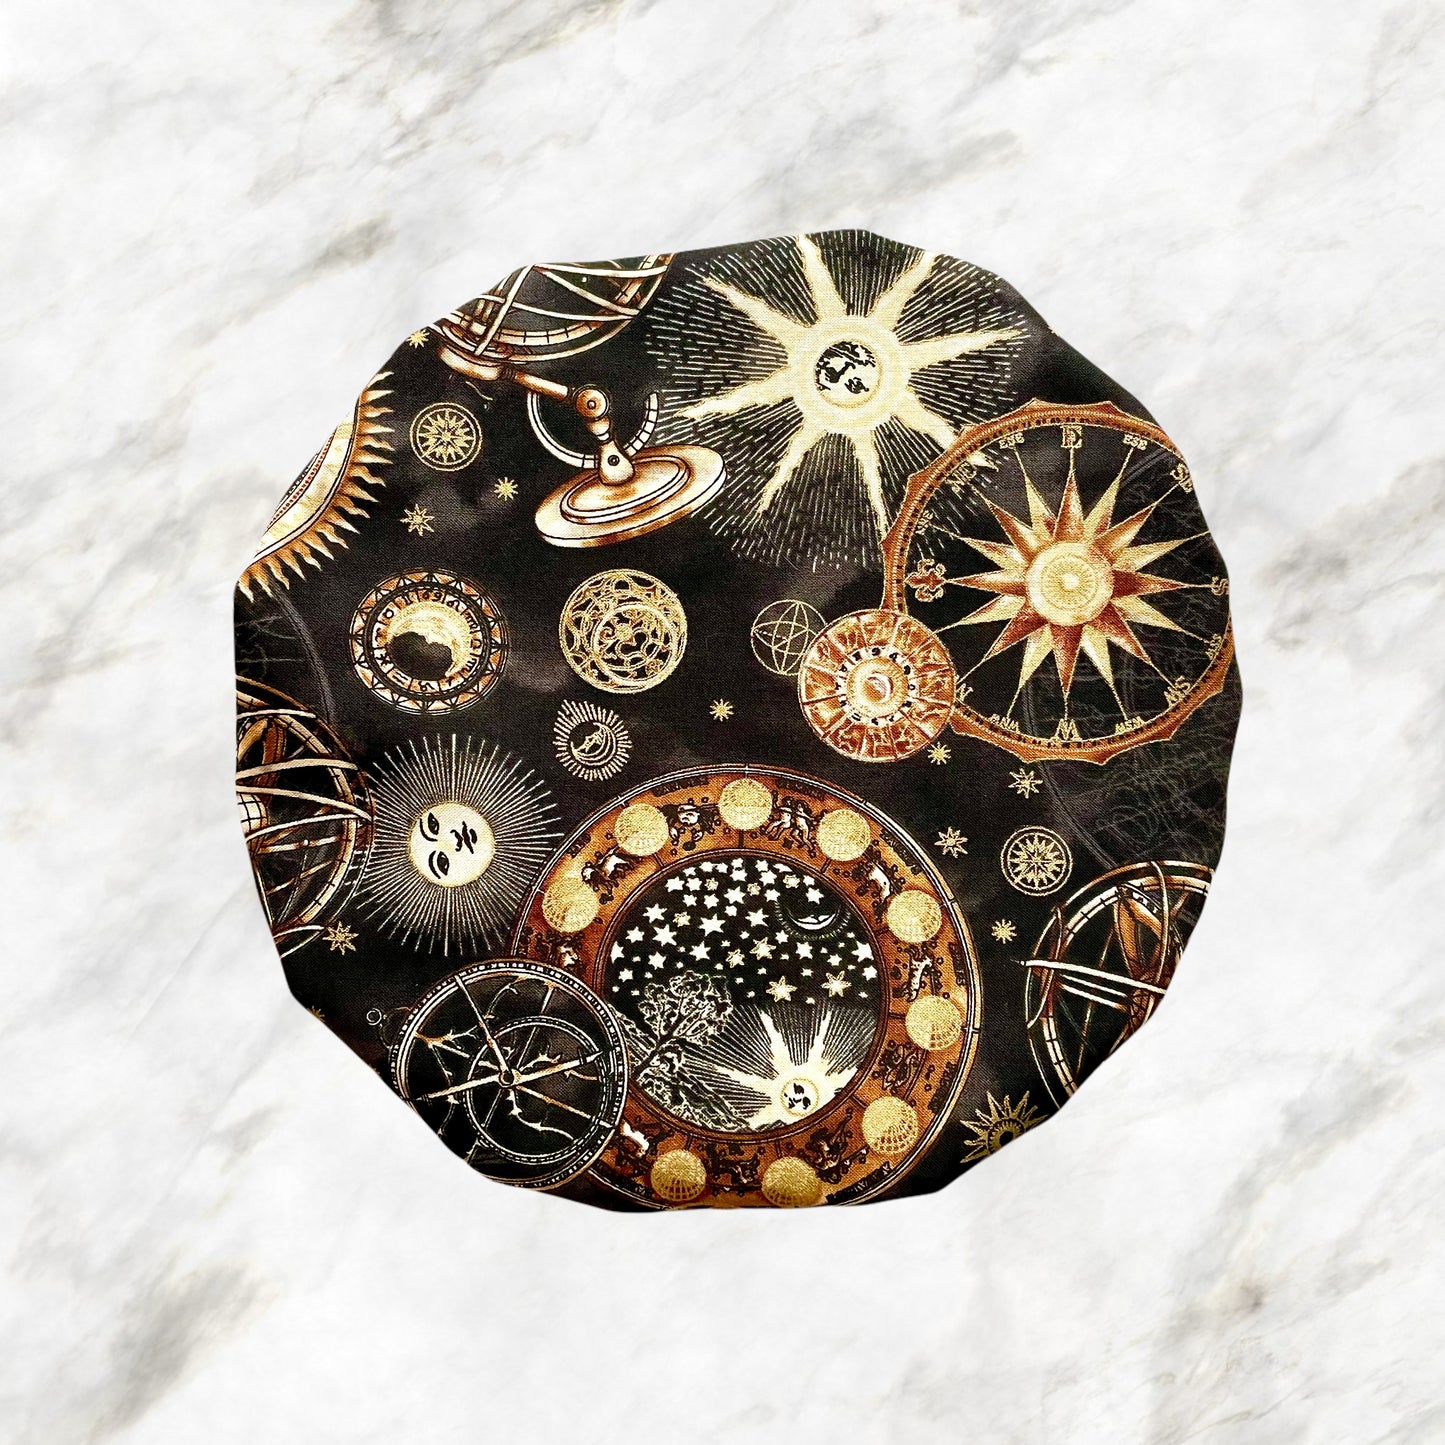 Stand Mixer Bowl Covers - Steampunk Compass